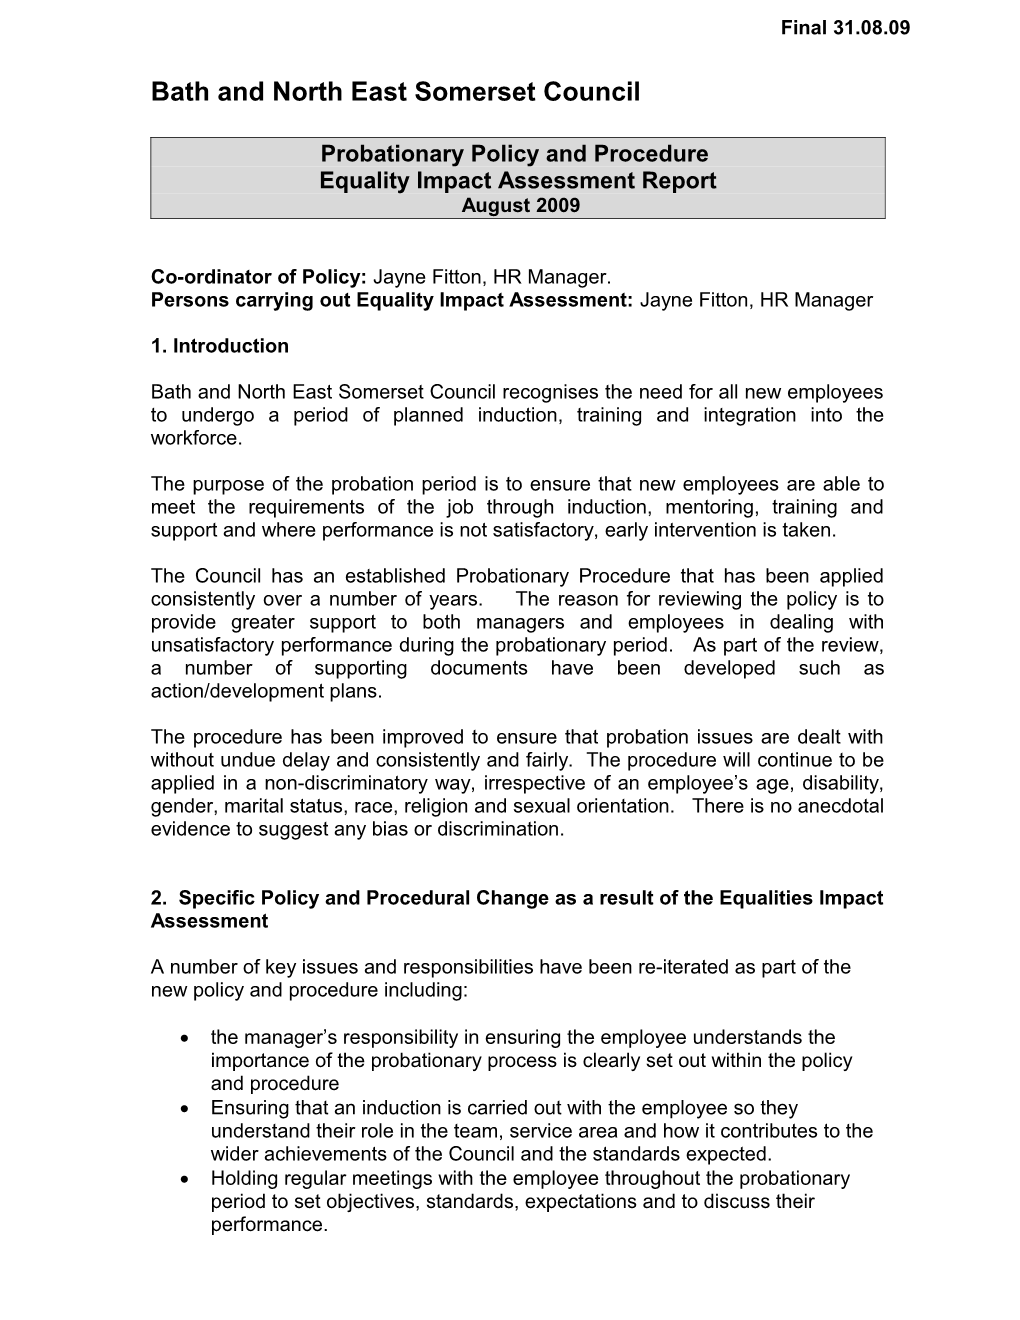 Equality Impact Assessment Report